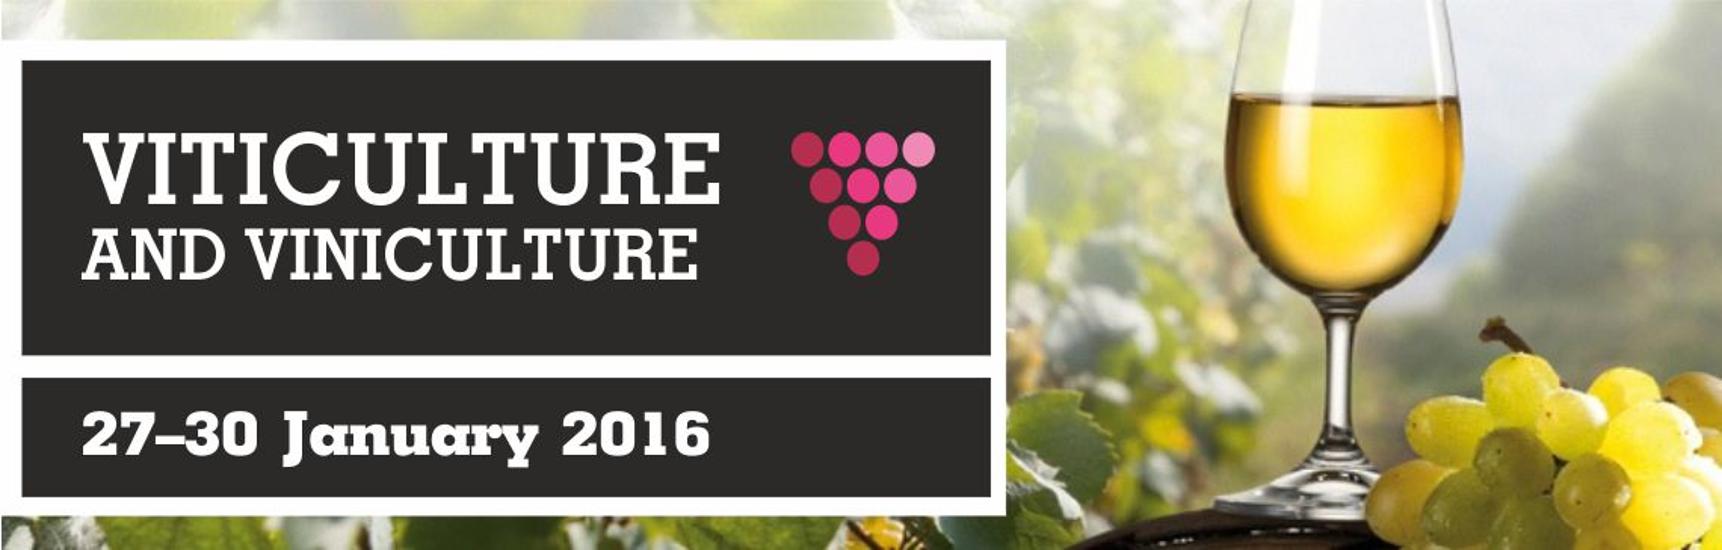 Viticulture & Viniculture Expo 2016, Hungexpo Budapest, 27 - 30 January